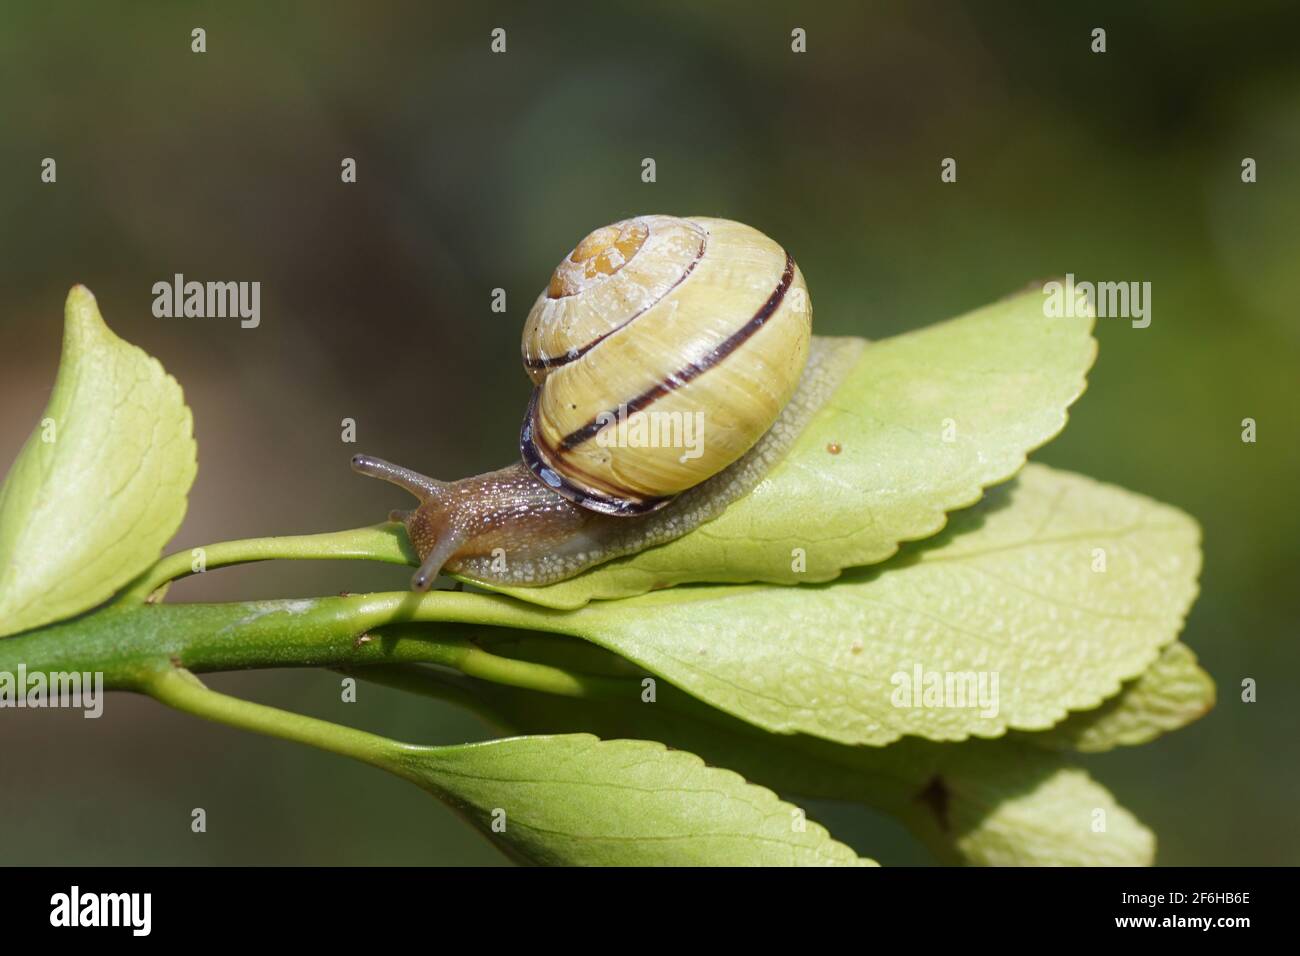 Grove snail or brown-lipped snail (Cepaea nemoralis) of the family Helicidae on a leaf. In a Dutch garden. Spring, March, Netherlands Stock Photo